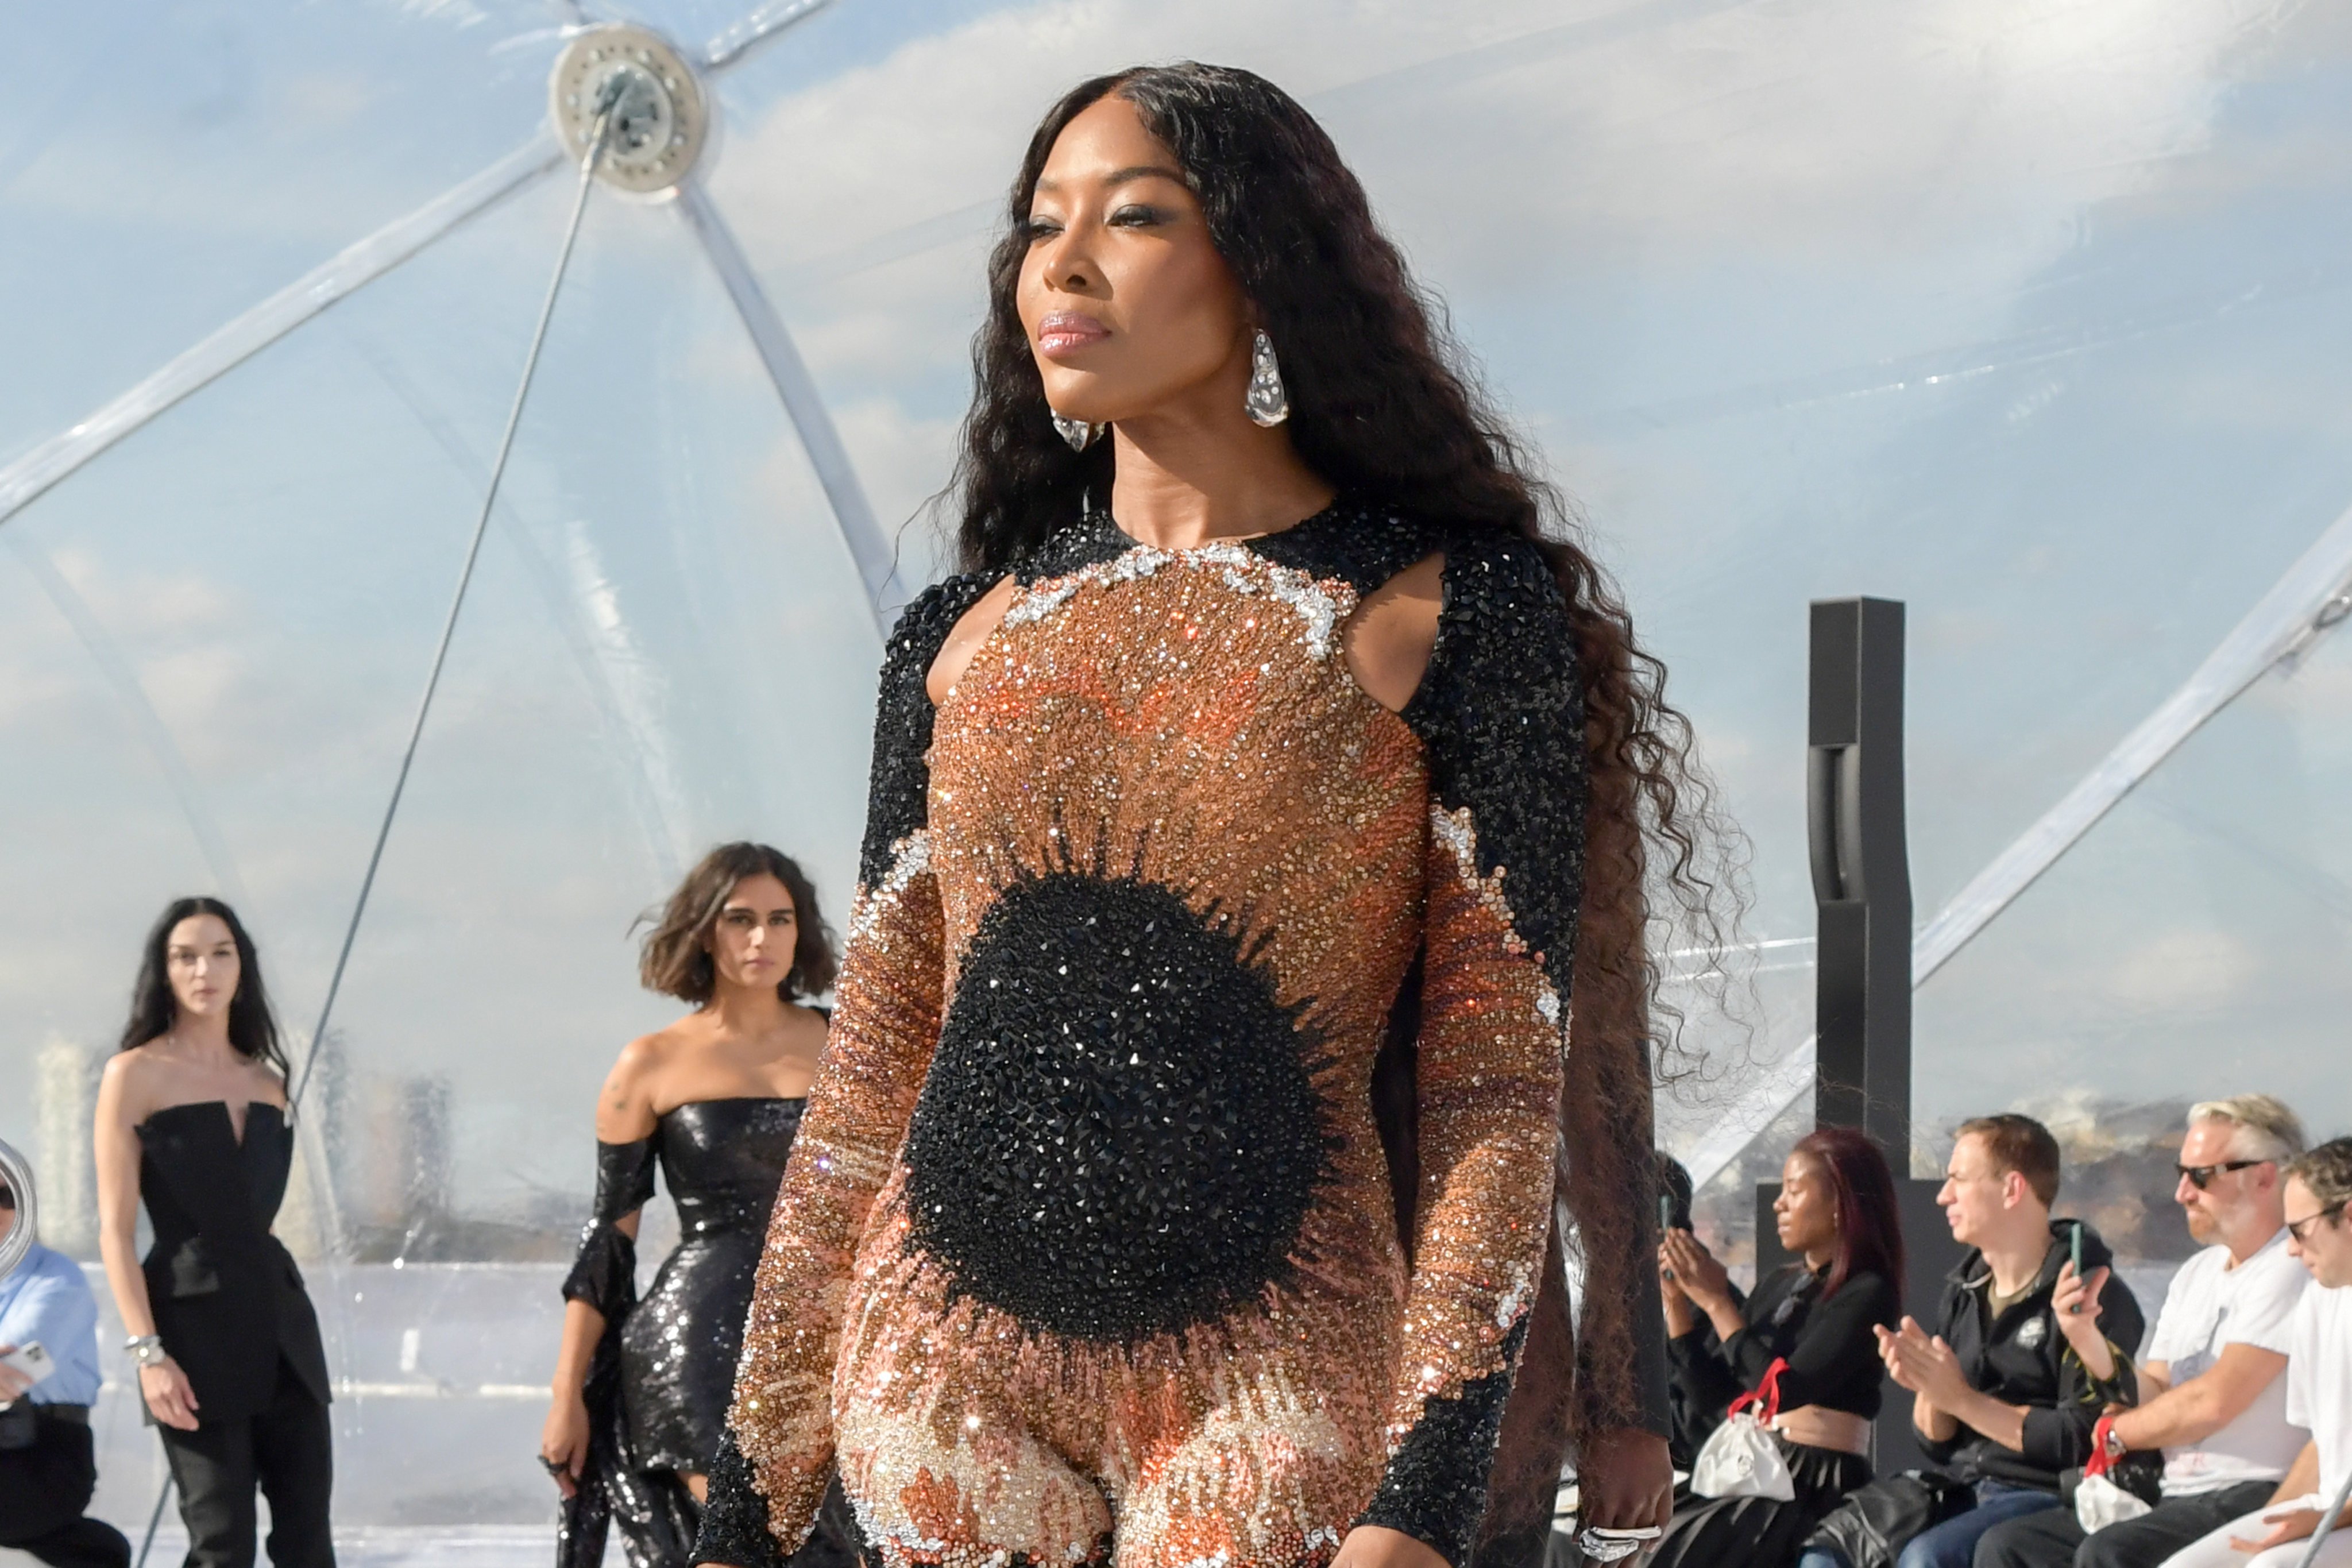 Naomi Campbell walks the runway at the Alexander McQueen spring/summer 2023 show at the Old Royal Naval College in London, England. Photo: Getty Images